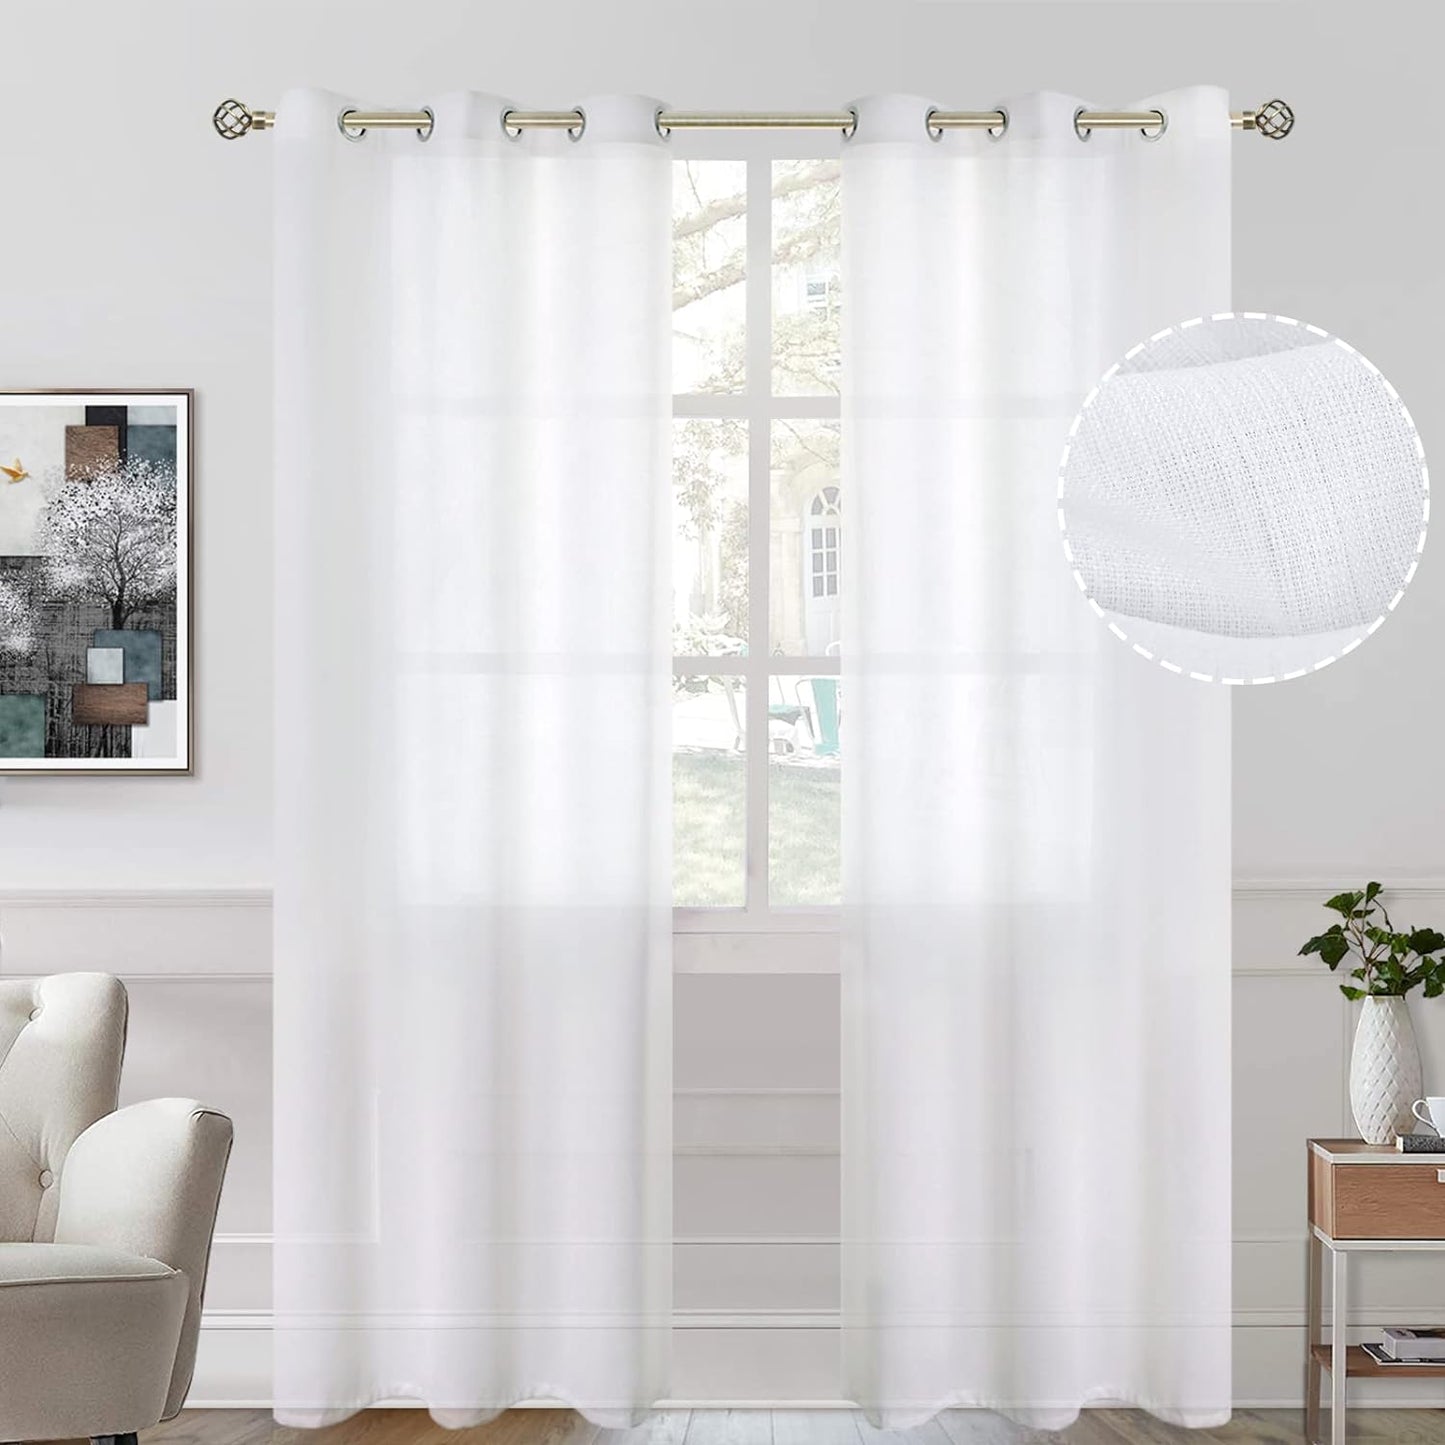 Bgment Natural Linen Look Semi Sheer Curtains for Bedroom, 52 X 54 Inch White Grommet Light Filtering Casual Textured Privacy Curtains for Bay Window, 2 Panels  BGment White 42W X 95L 